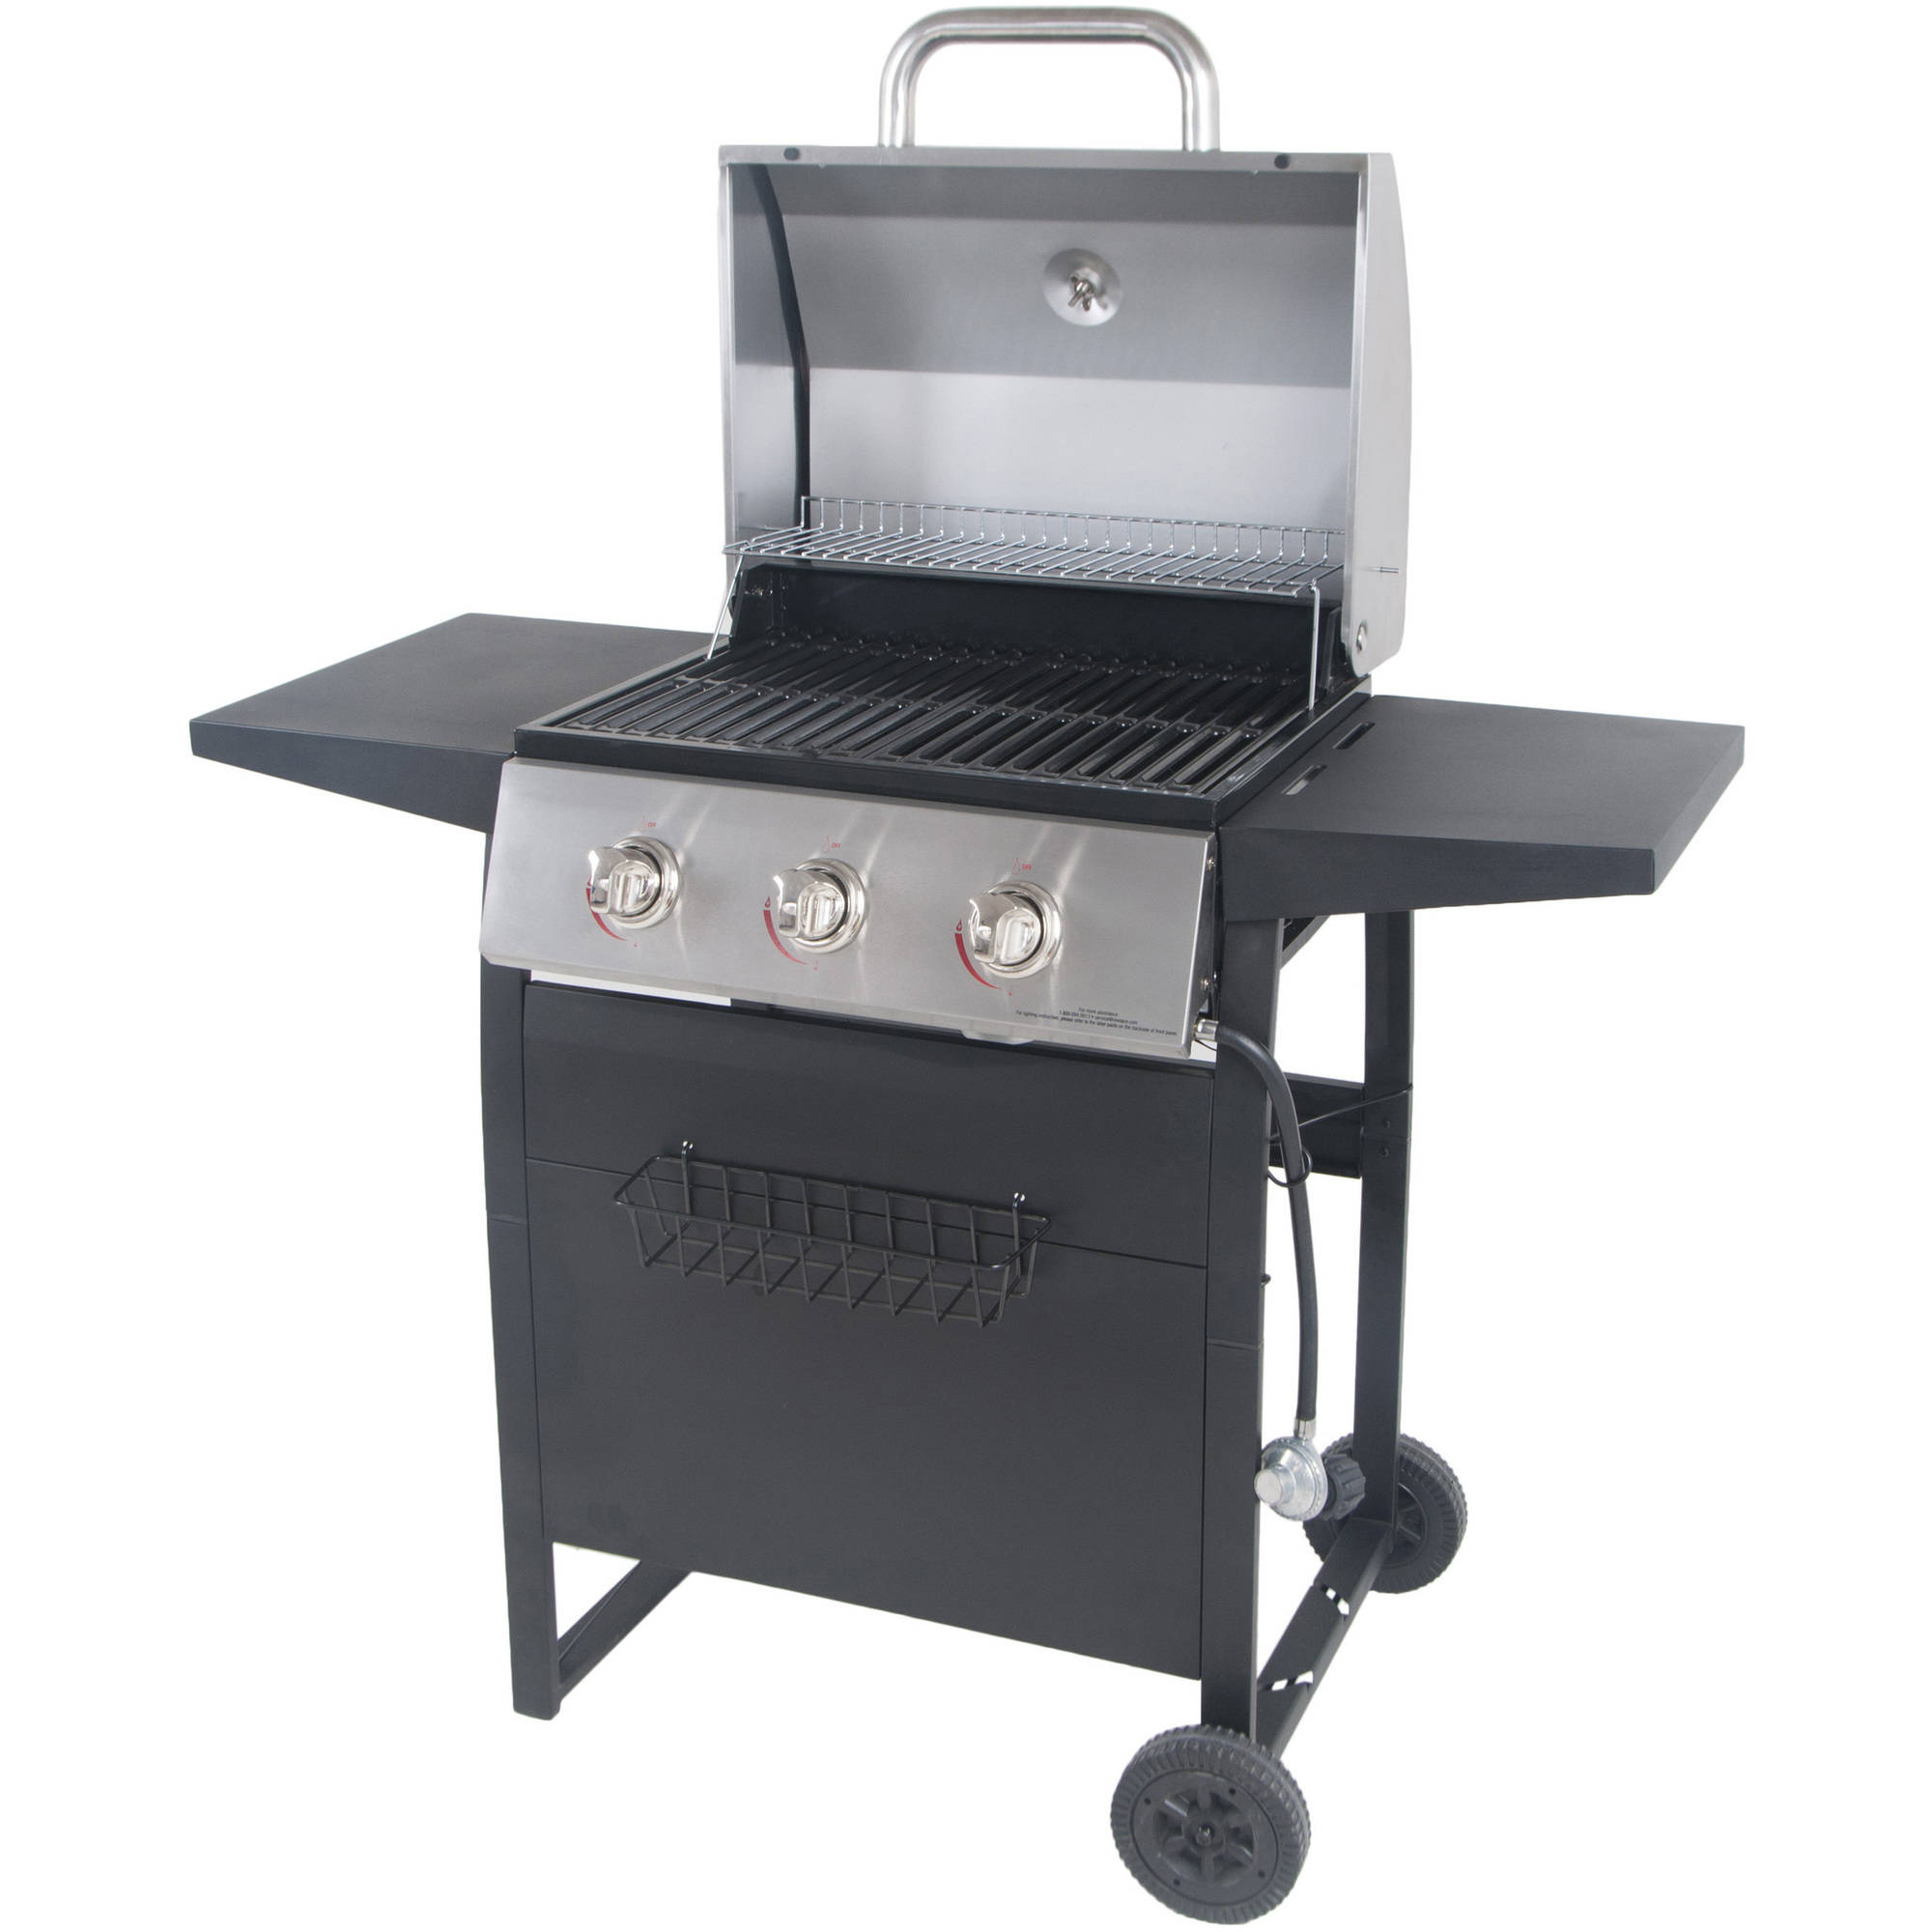 RevoAce 3-Burner Space Saver Propane Gas Grill, Stainless and Black, GBC1706W - image 5 of 11